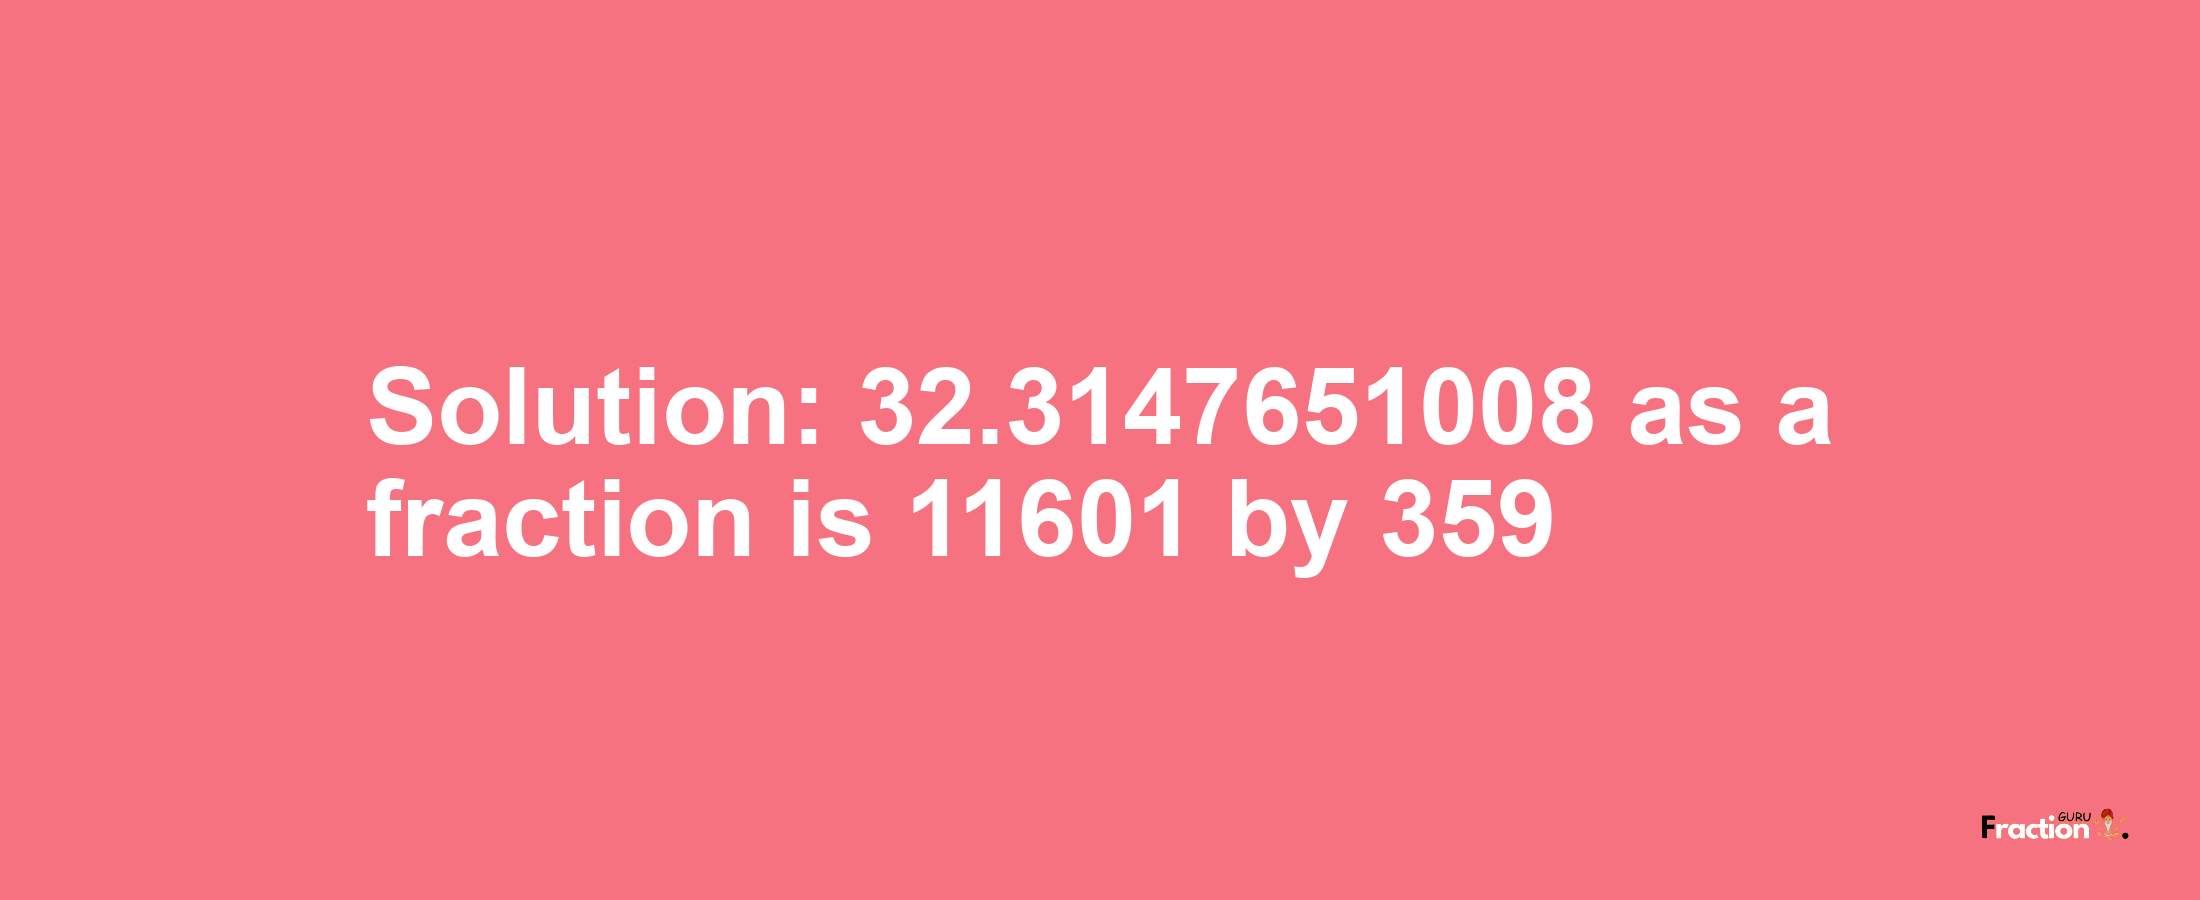 Solution:32.3147651008 as a fraction is 11601/359